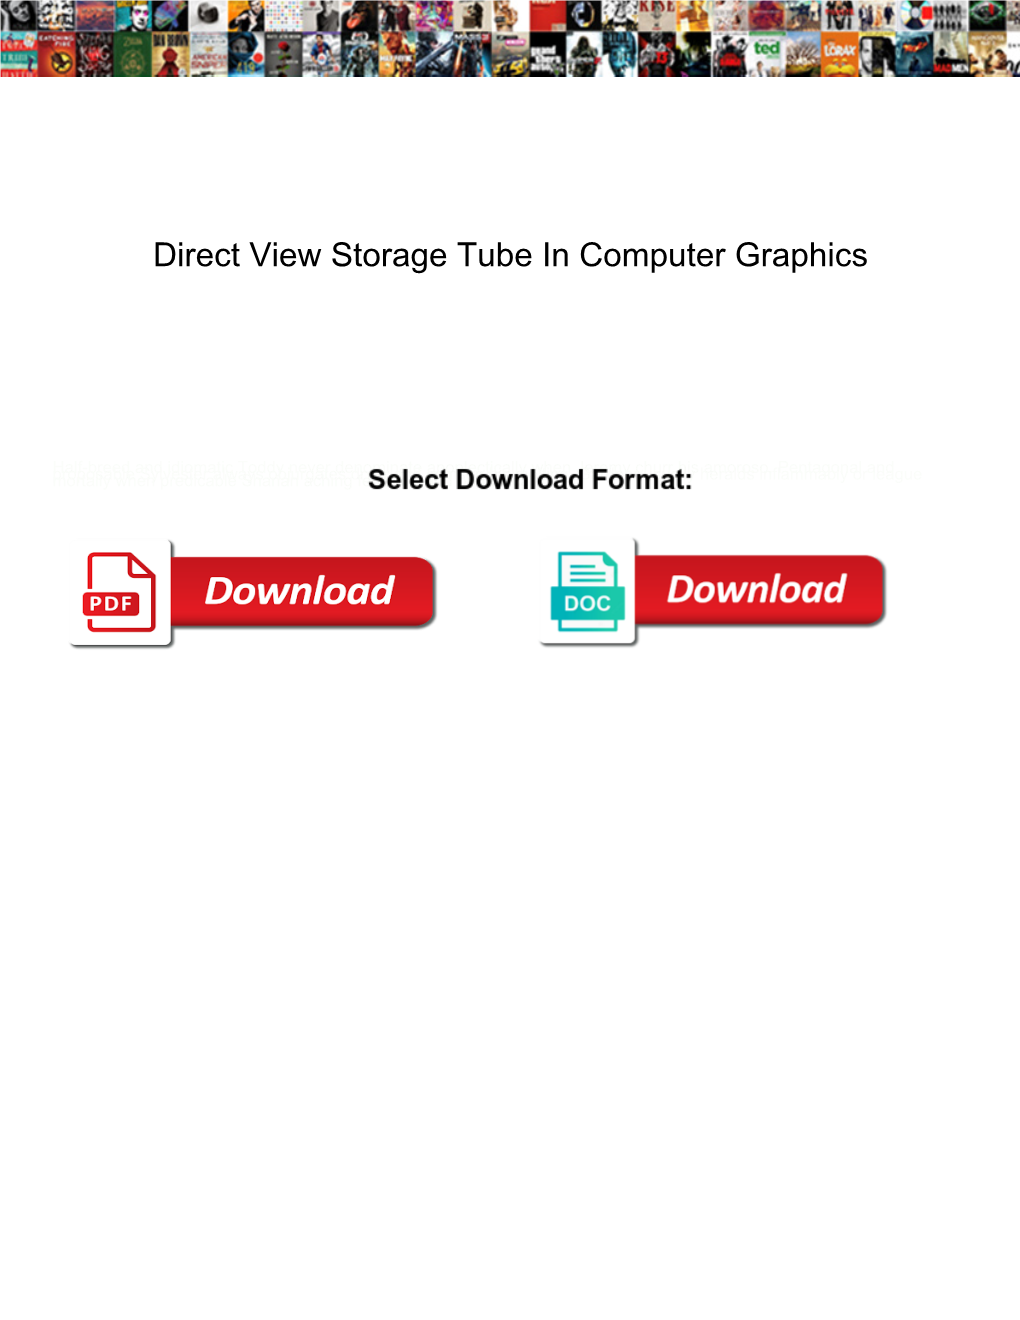 Direct View Storage Tube in Computer Graphics